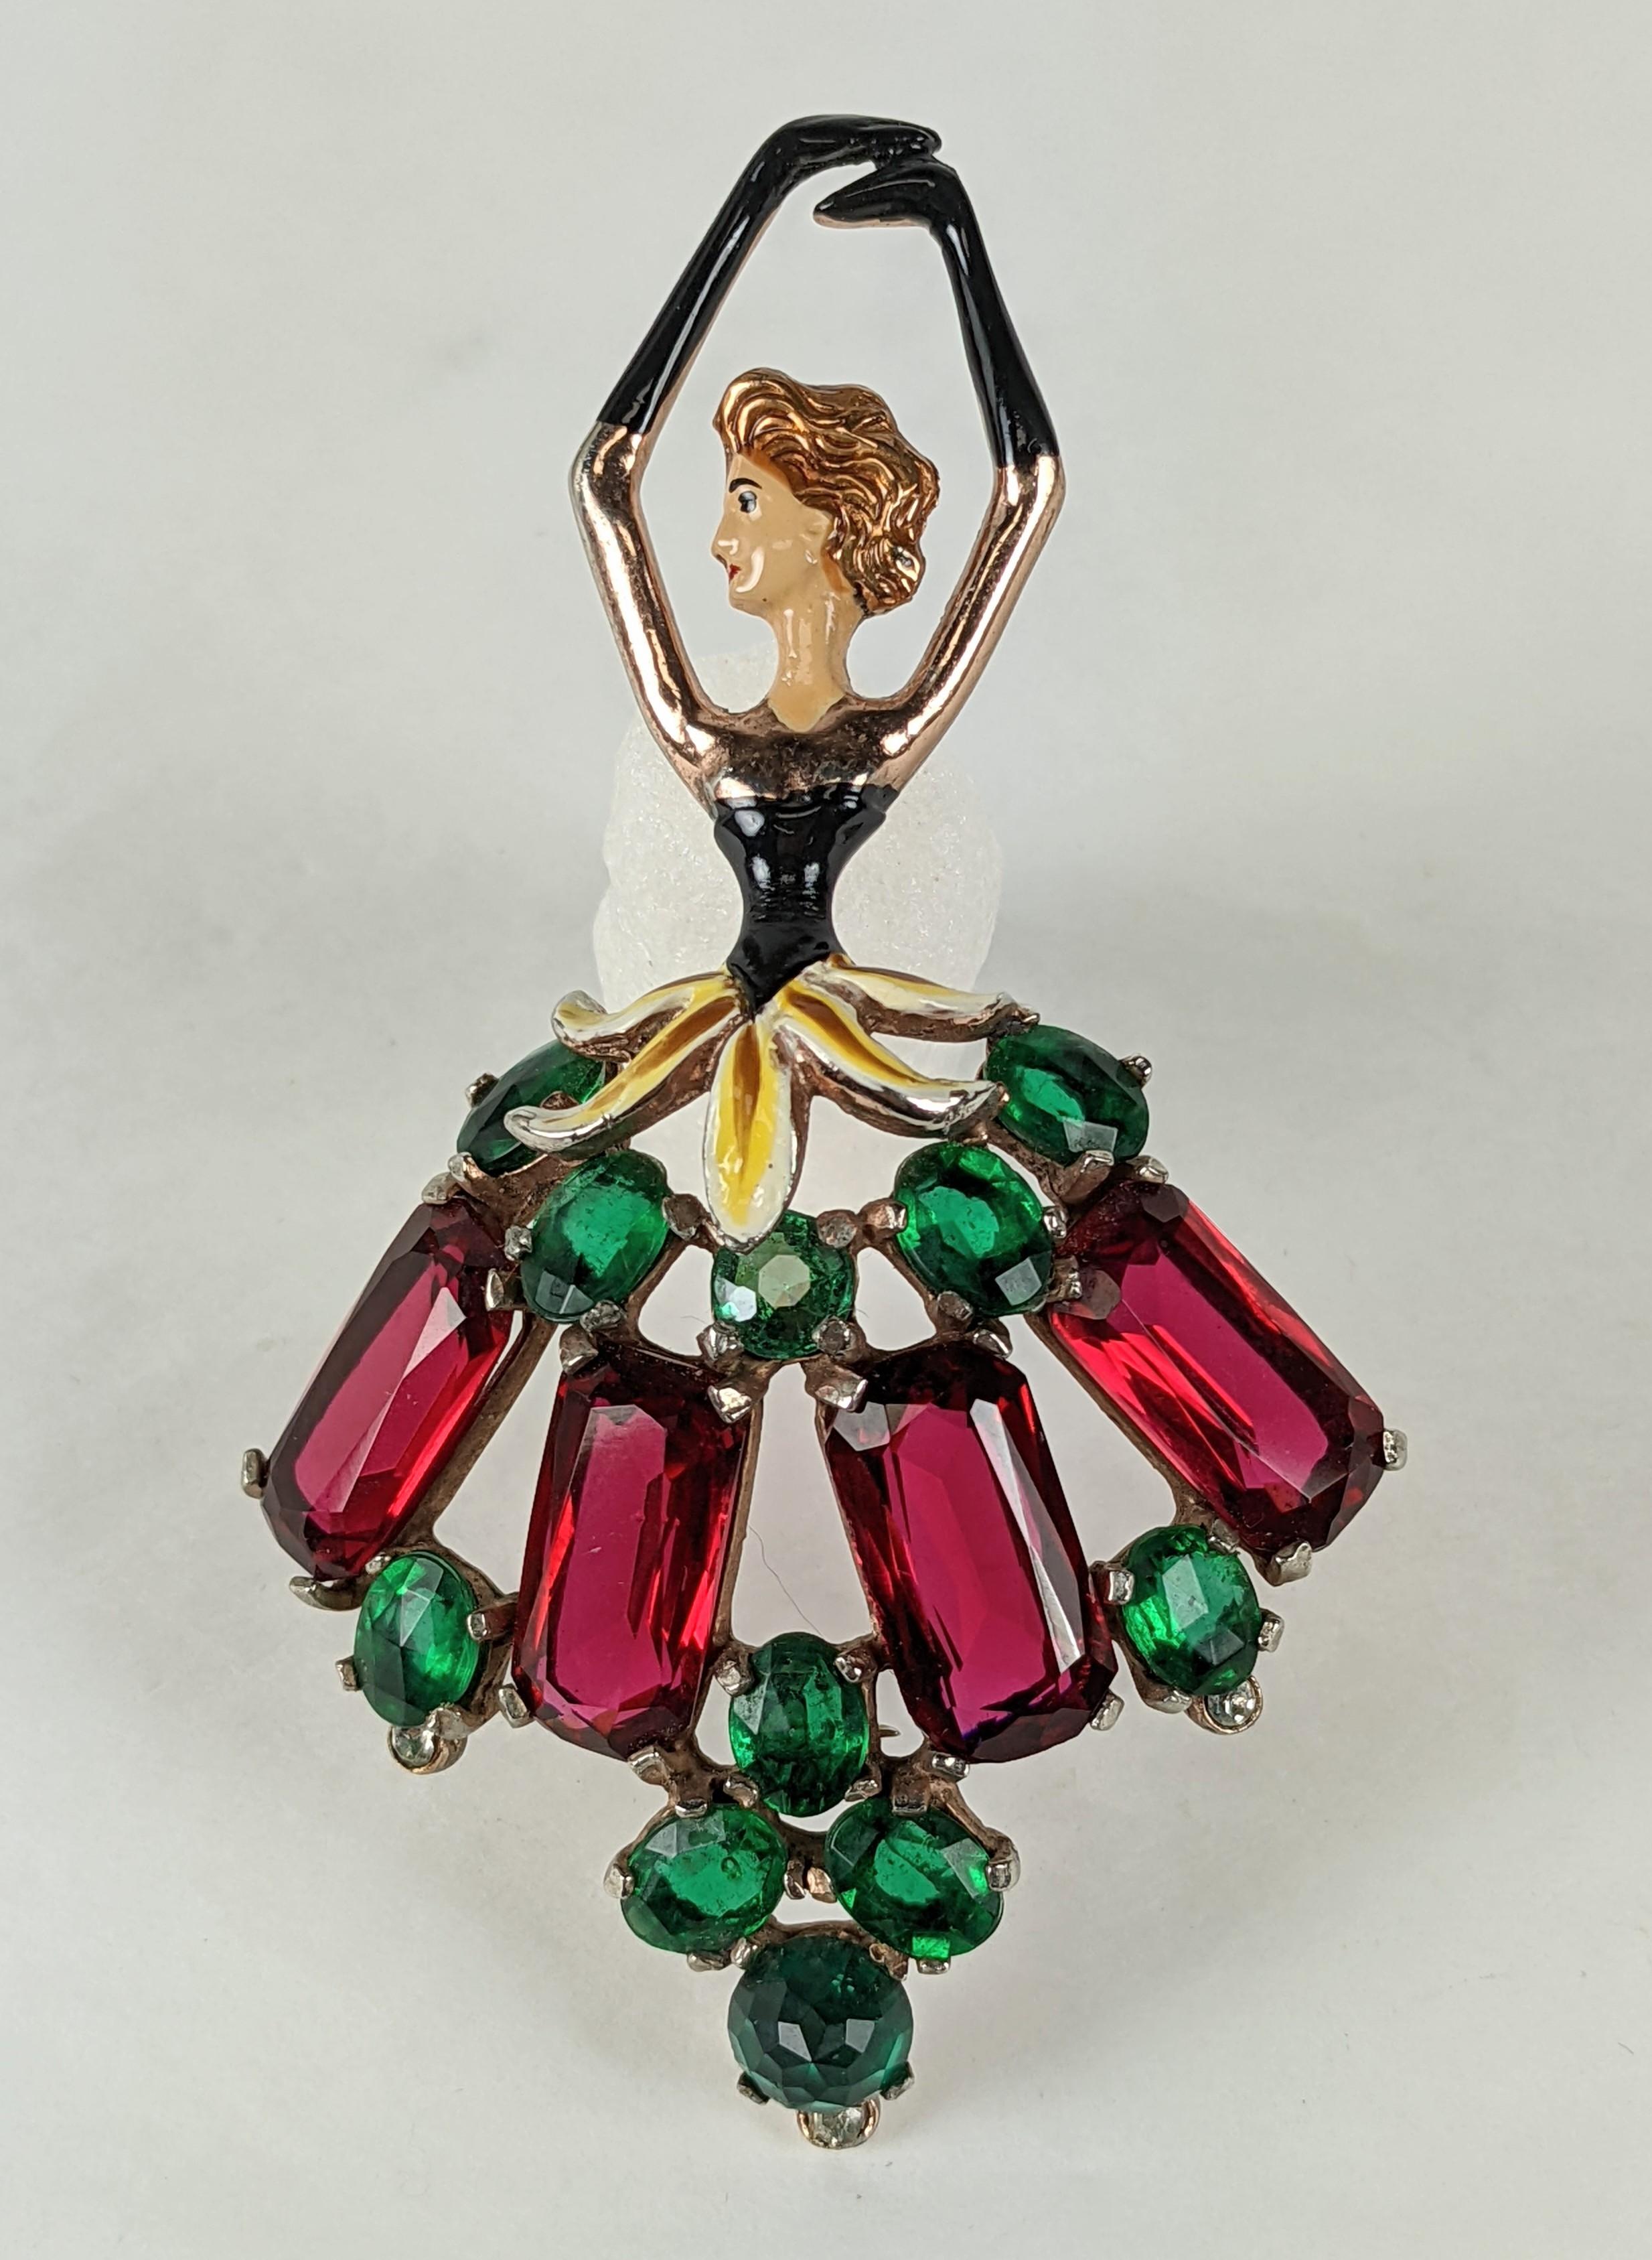 Charming Fred Block Art Deco Ballerina Brooch with enamel accents and large stones forming the skirt in ruby and emerald. Oversized wonderful figural Retro suit brooch.
Unsigned. 1940's USA.   3.75